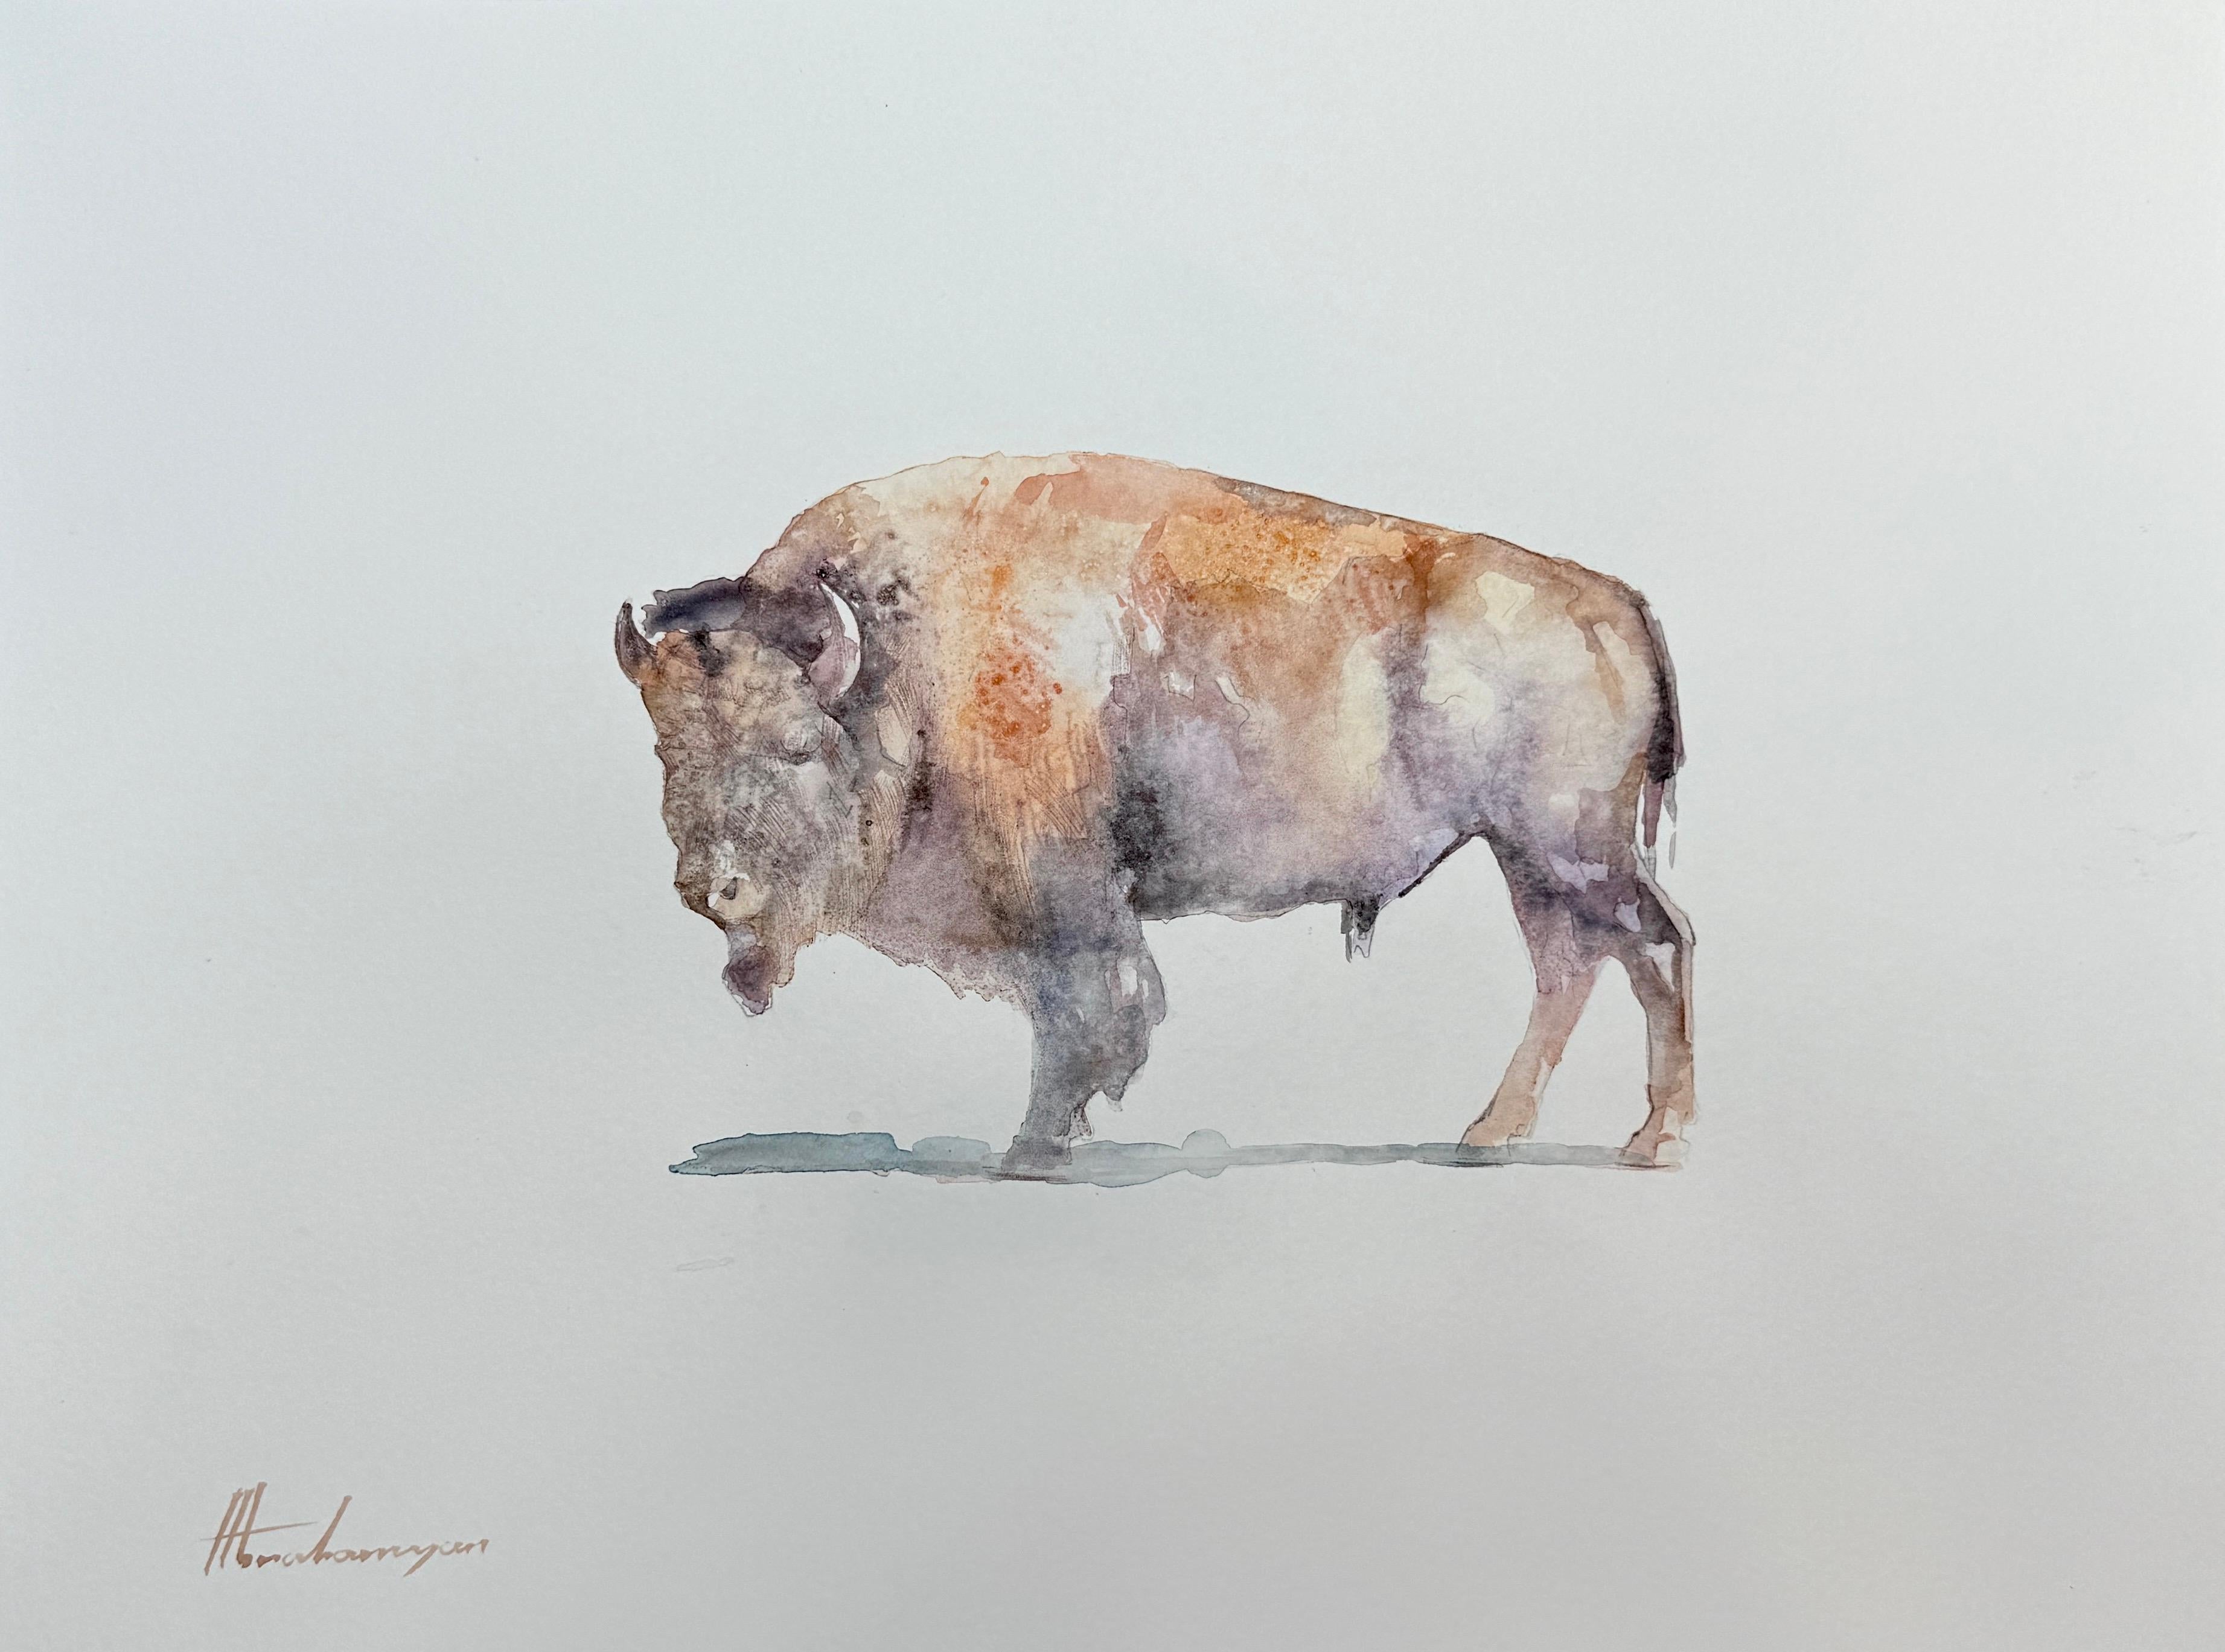 Artyom Abrahamyan Animal Art - Bison, Animal, Watercolor on Paper, Handmade Painting, One of a Kind